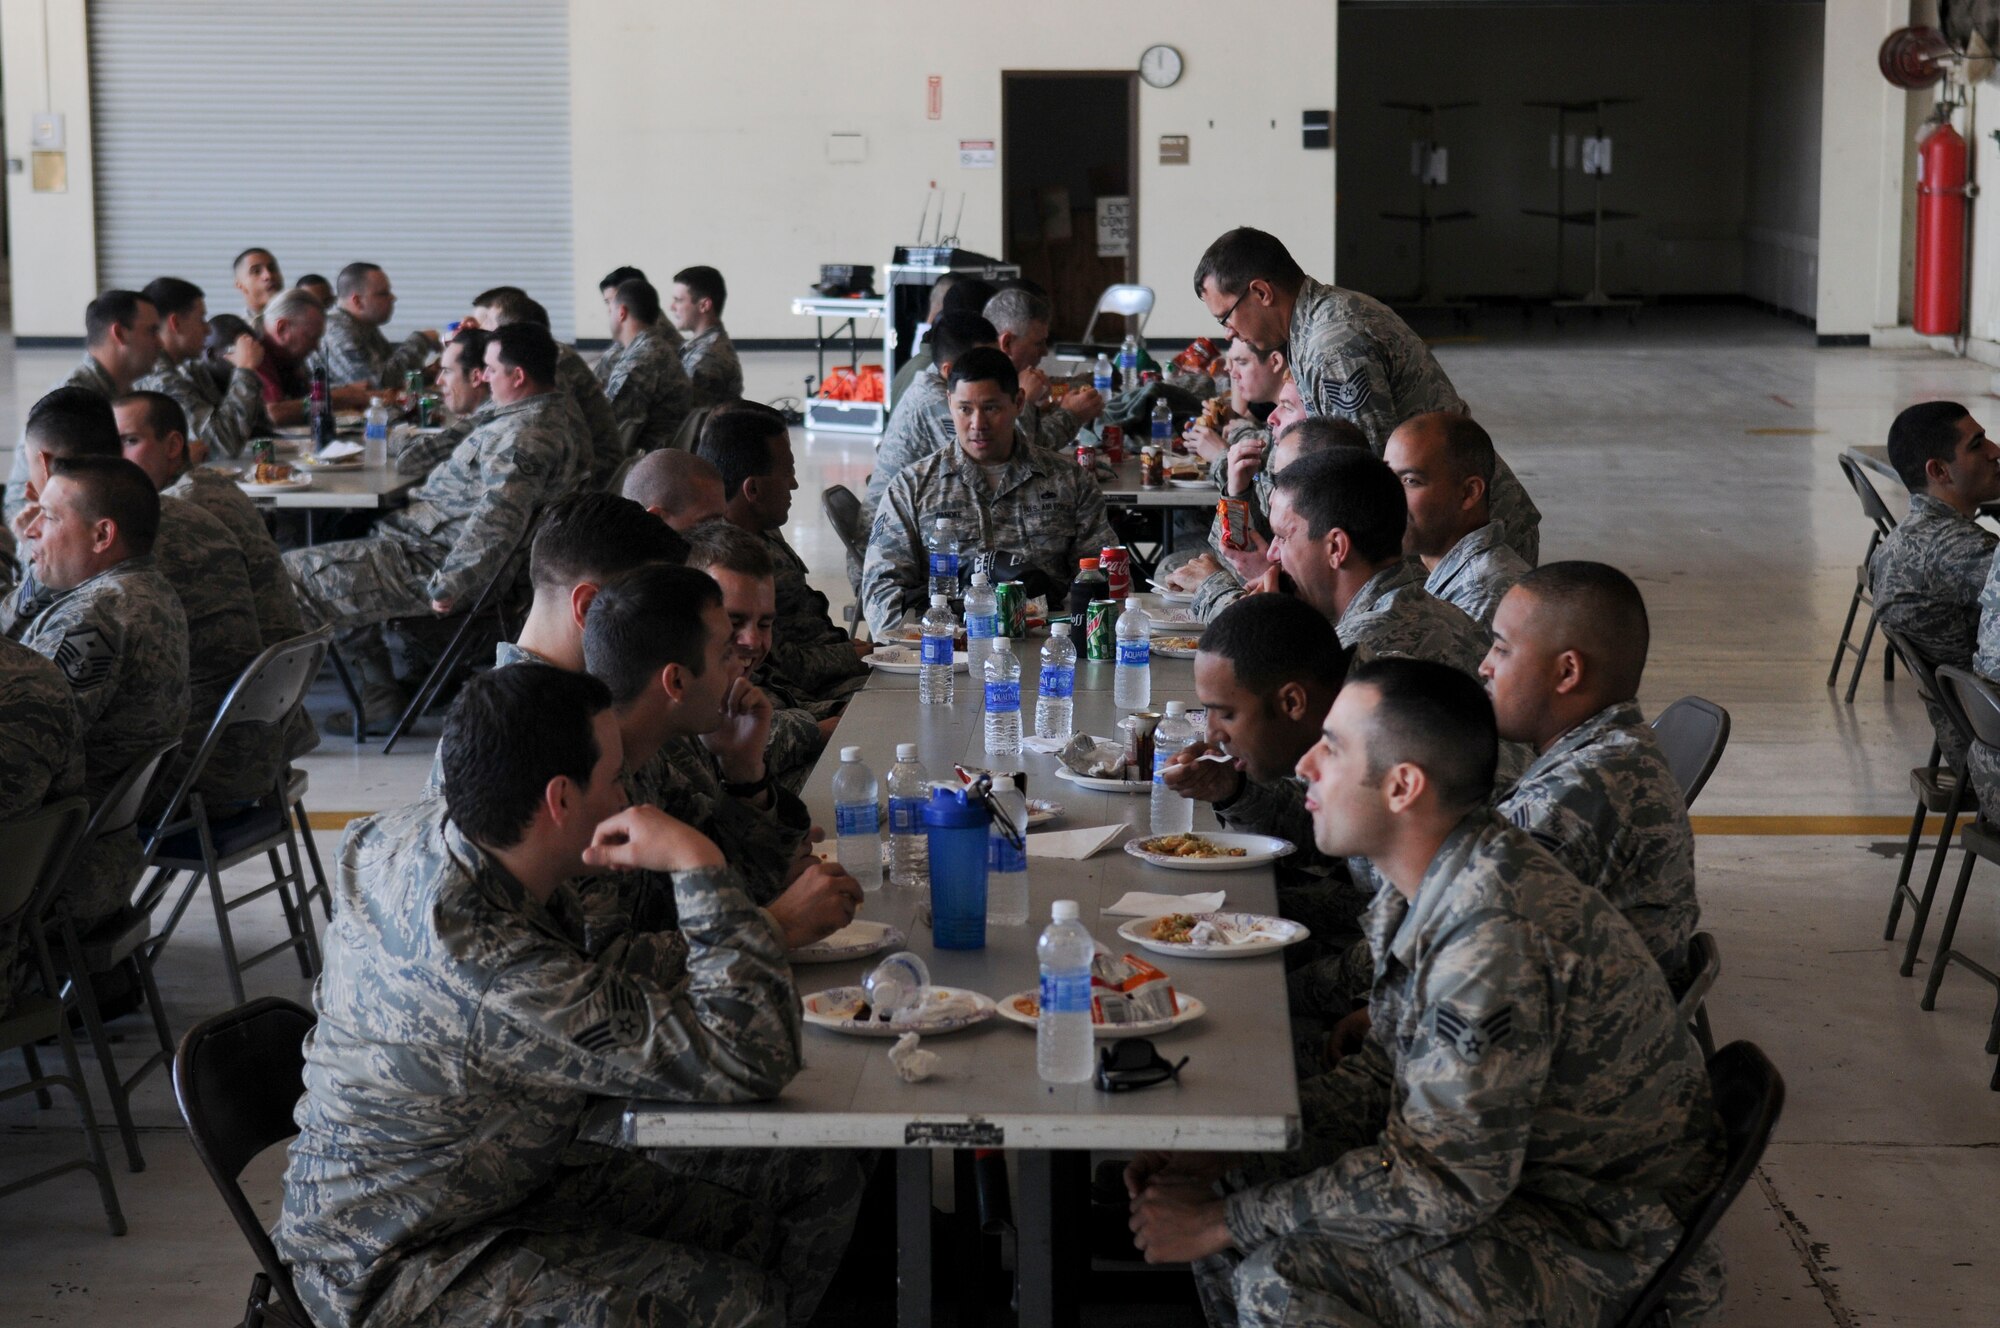 Beale Airmen talk during the inaugural Airman 2 Airman Prayer Lunch on Beale Air Force Base, California, Mar. 17, 2016. Airmen were invited to have lunch and open prayer by the Beale Chaplain Corps Team. (U.S. Air Force photo by Senior Airman Michael Hunsaker)